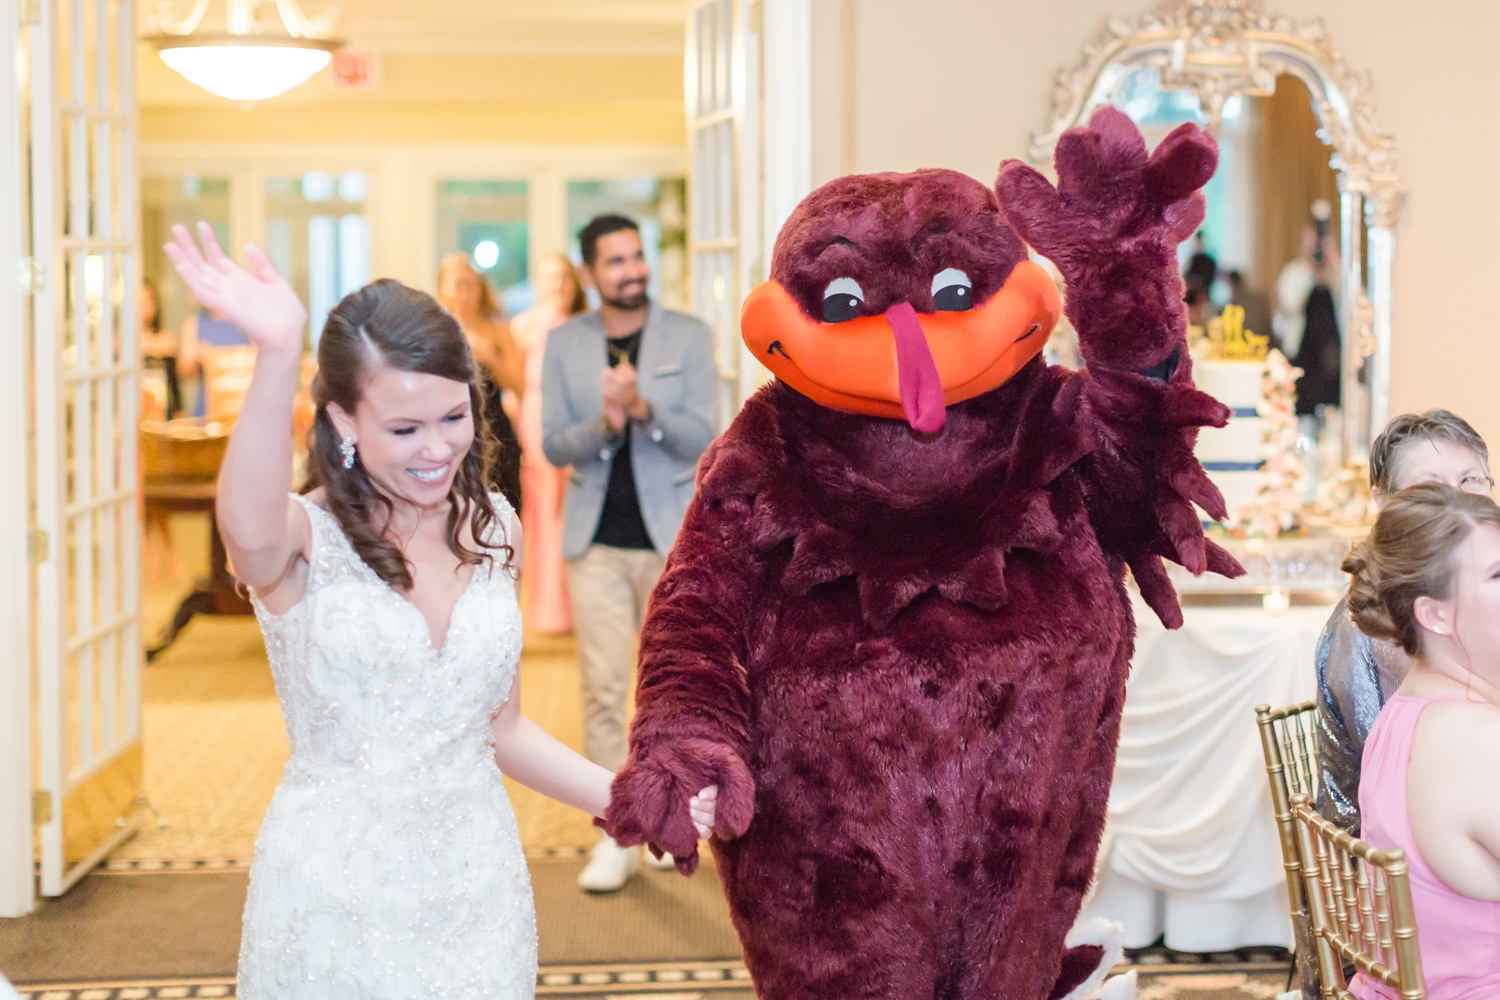  The Hokie Bird came to the wedding! What a fun surprise! 